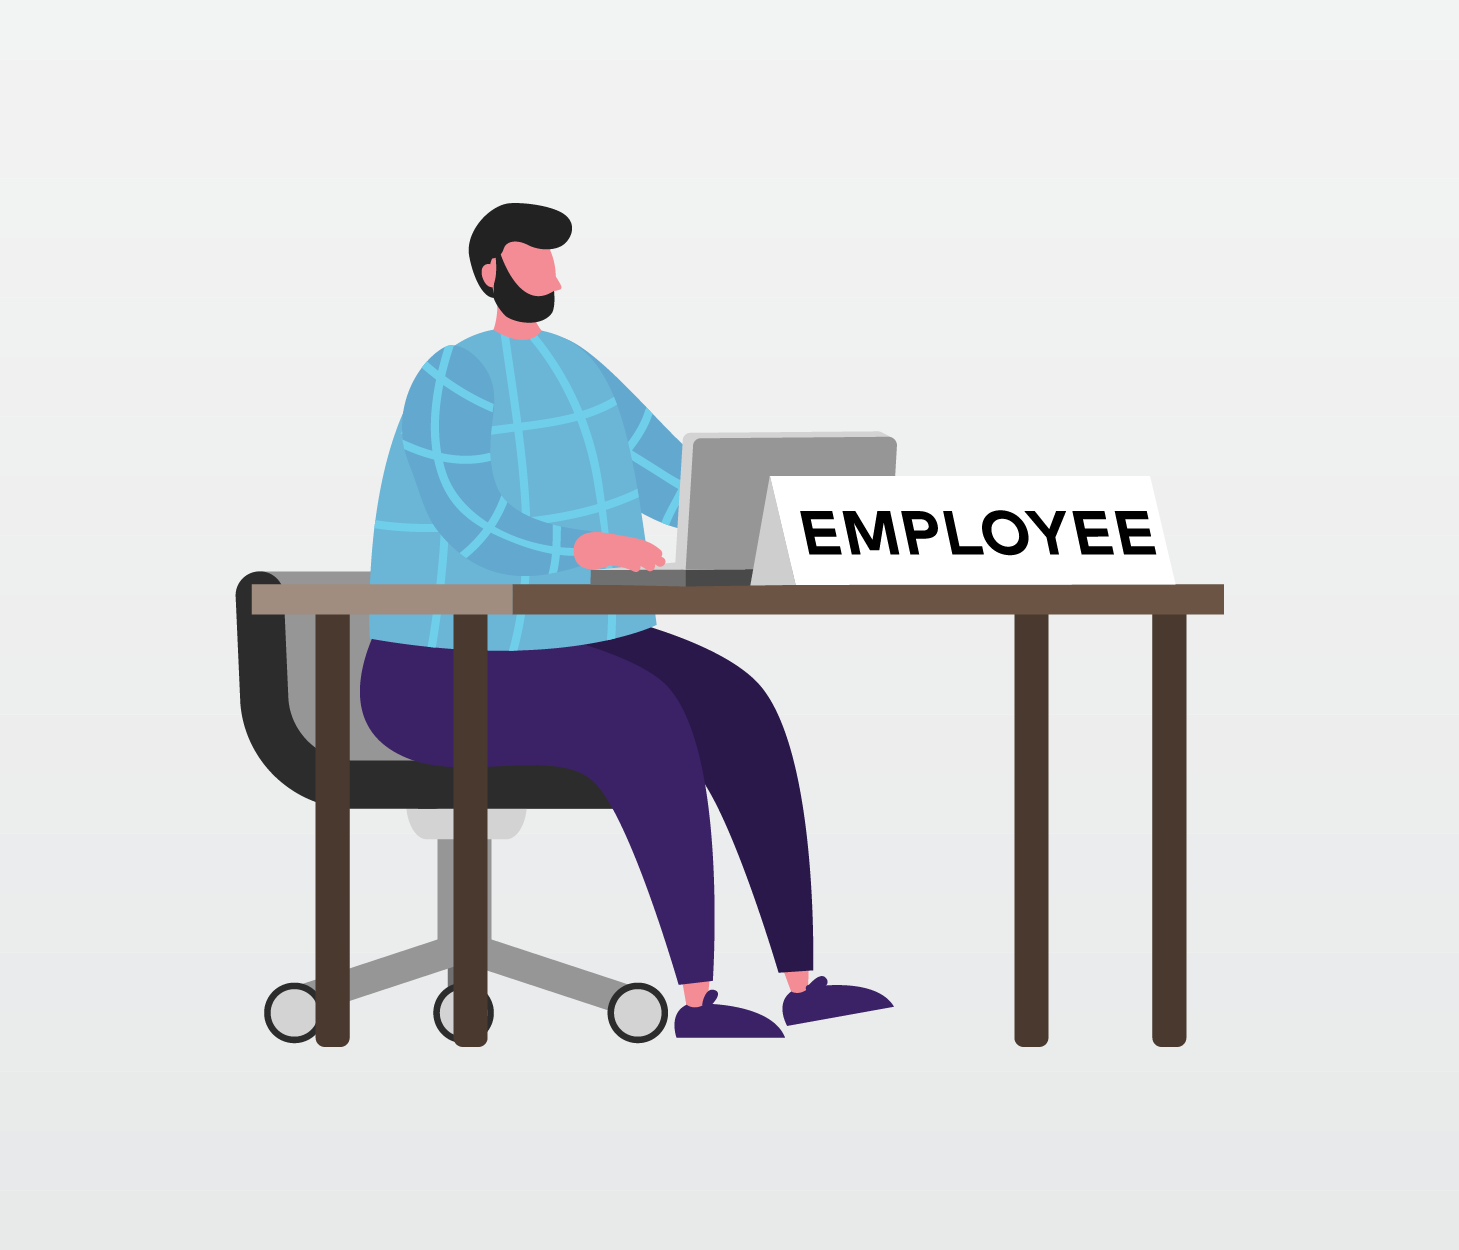 Image of man sitting at desk with name tag that says "EMPLOYEE"